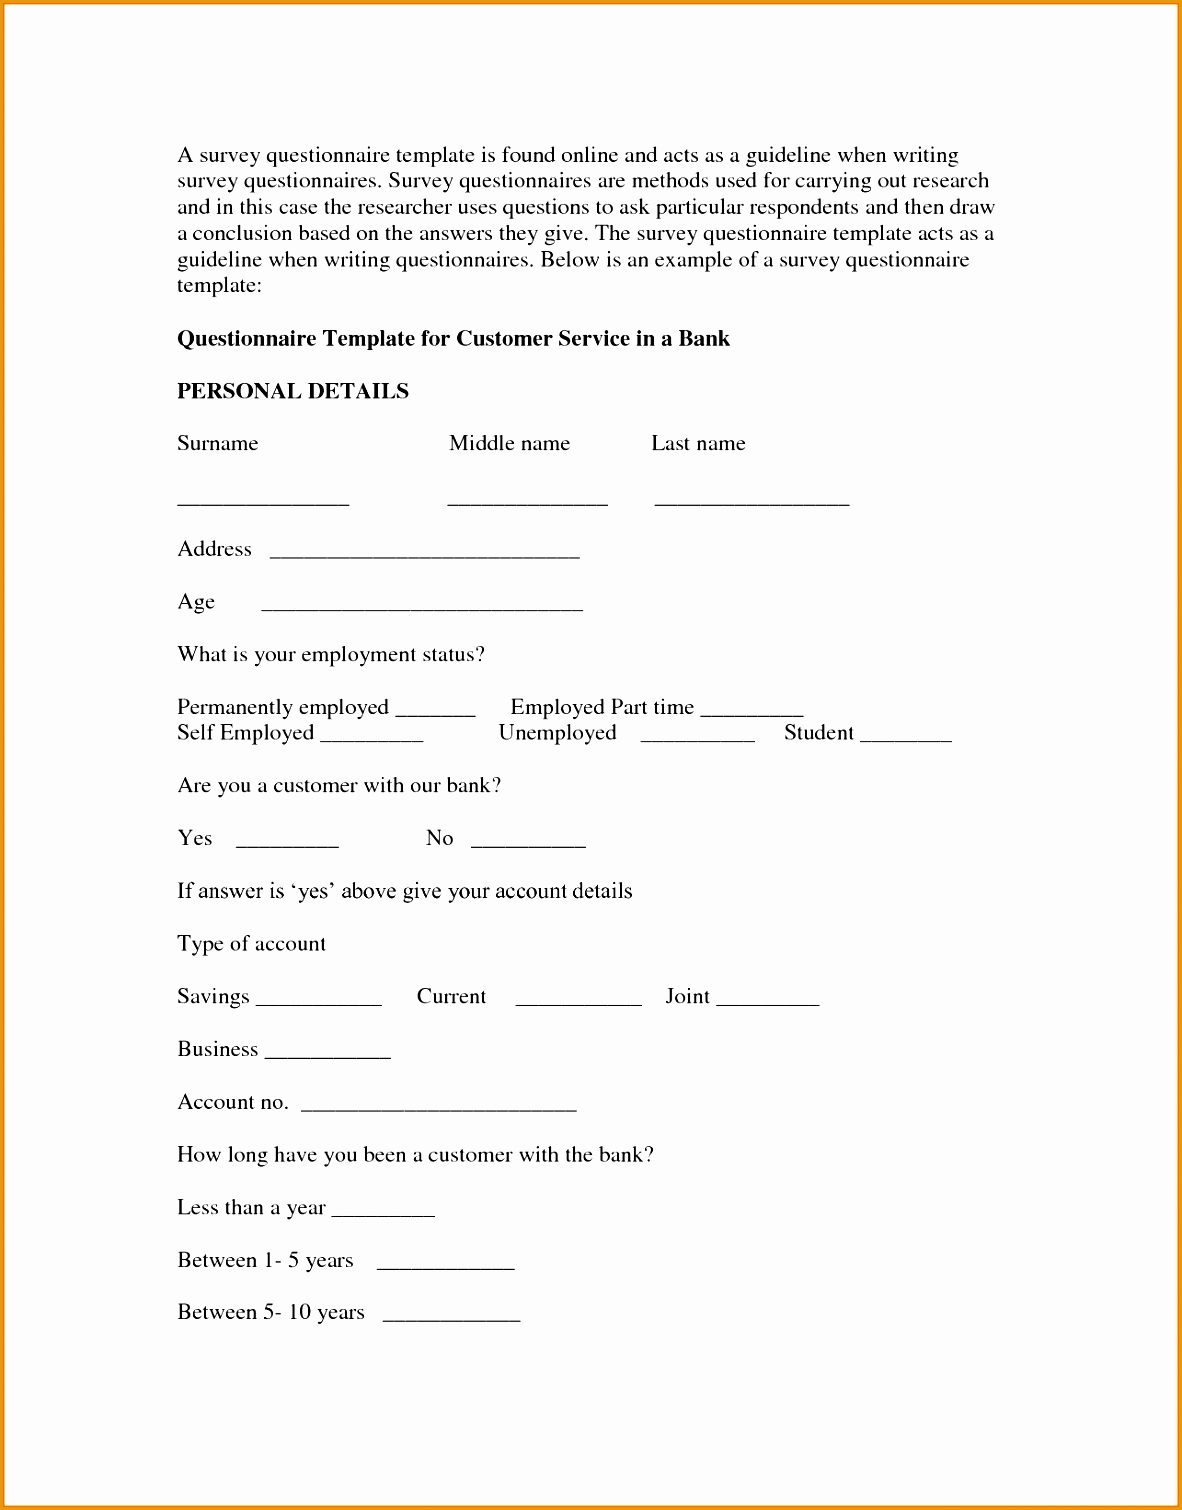 8 questionnaire template word15101182